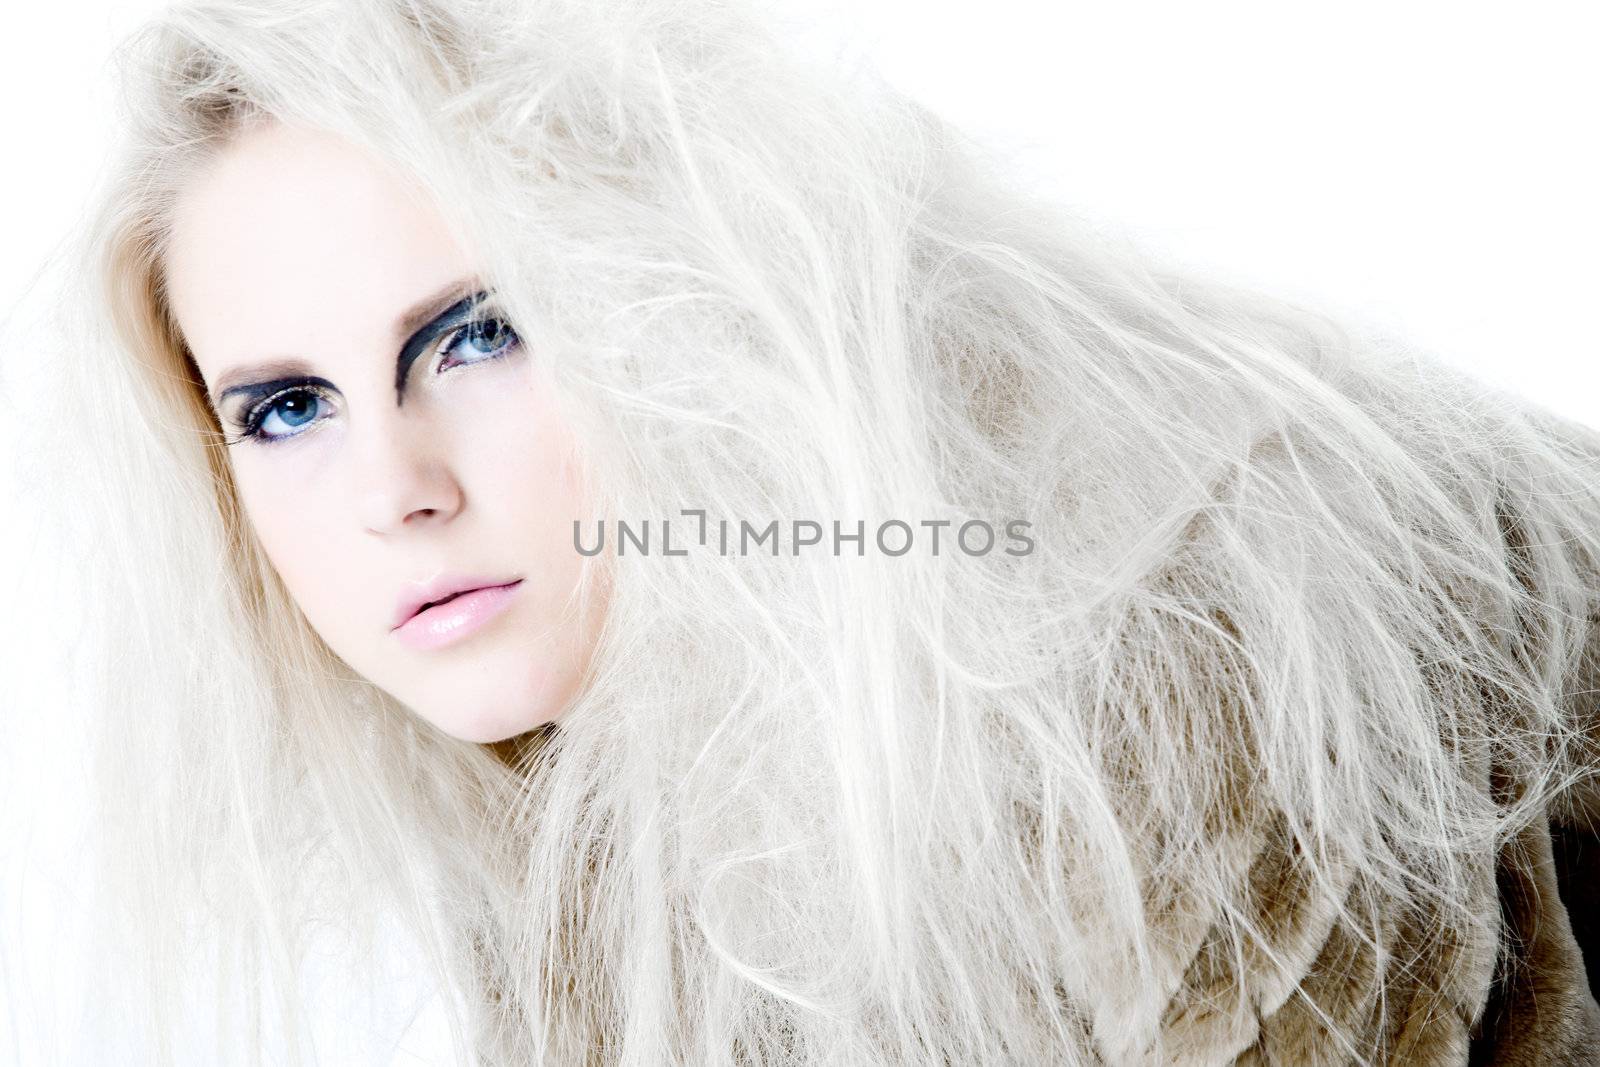 Model with white hair in a high fashion pose looking curious at the viewer.
Usable for health and beauty, cosmetics, love, hate and emotional issues.